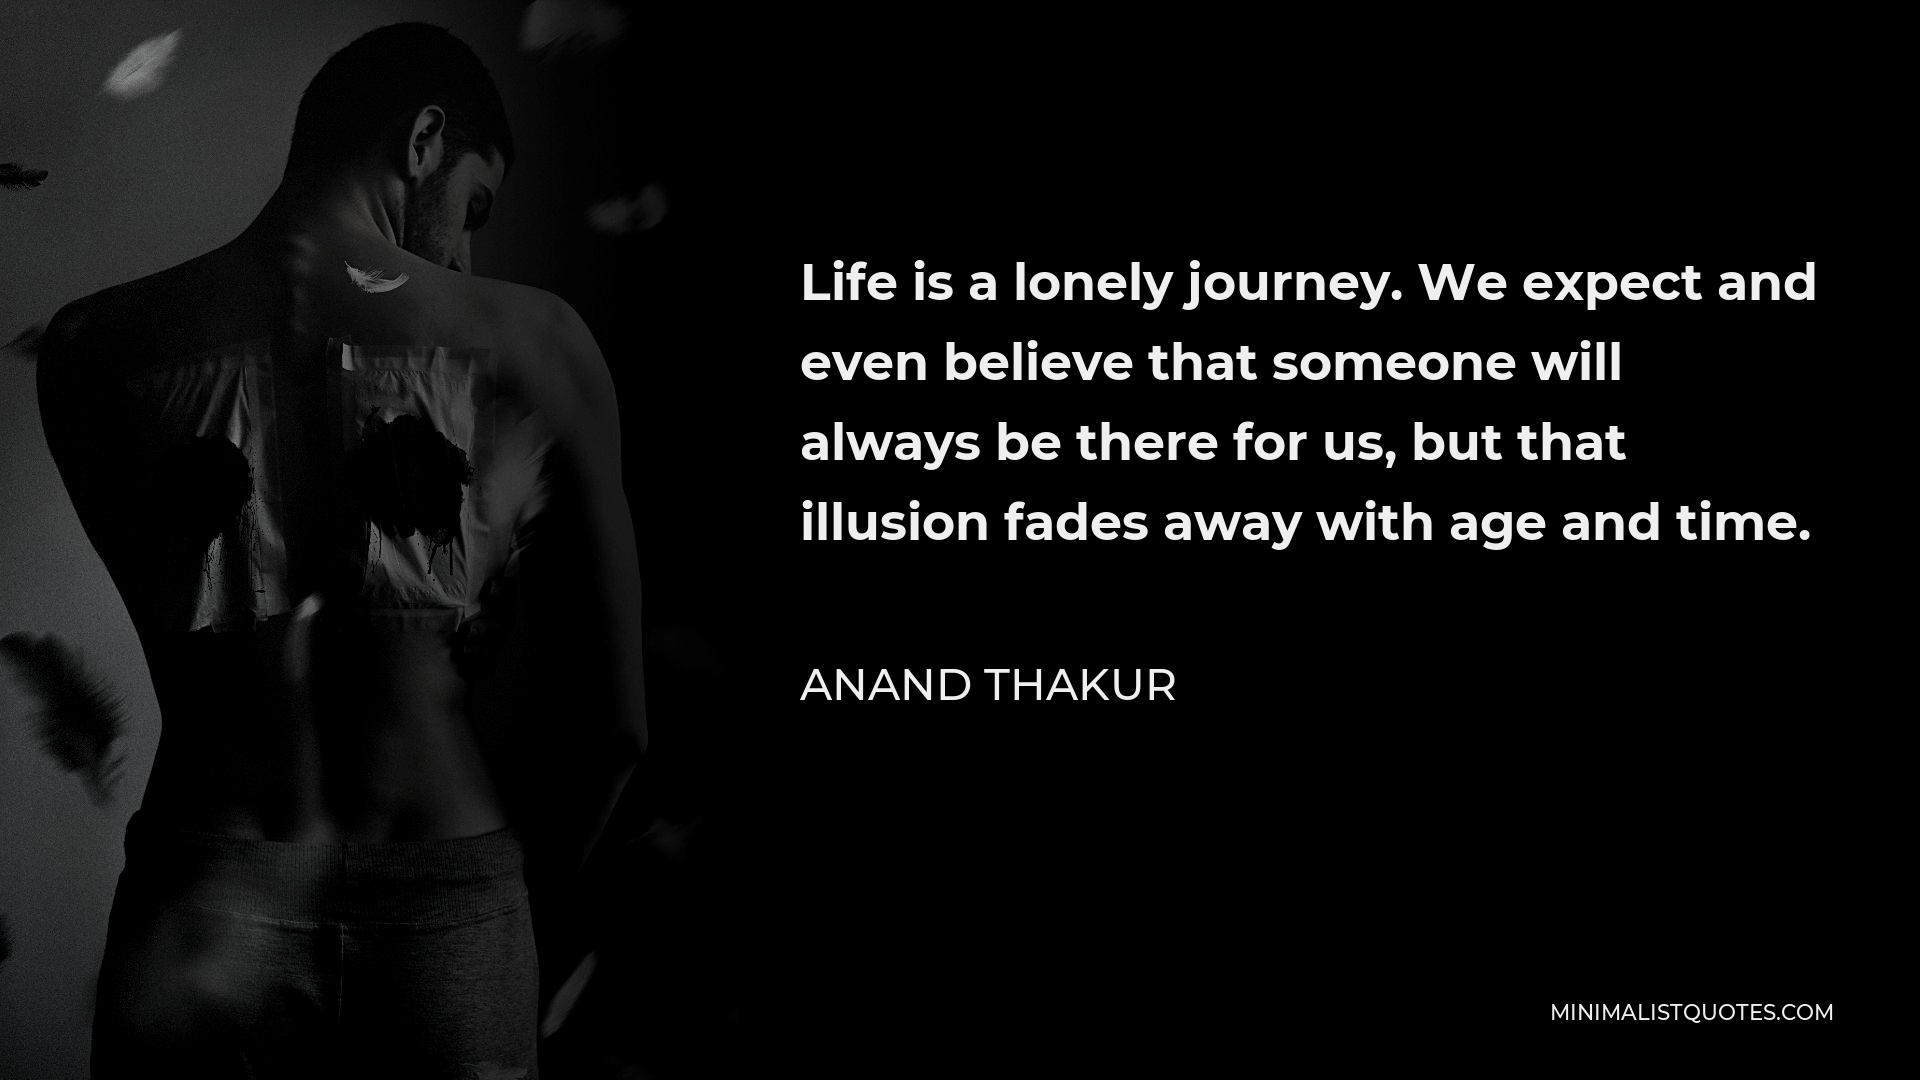 Anand Thakur Quote - Life is a lonely journey. We expect and even believe that someone will always be there for us, but that illusion fades away with age and time.